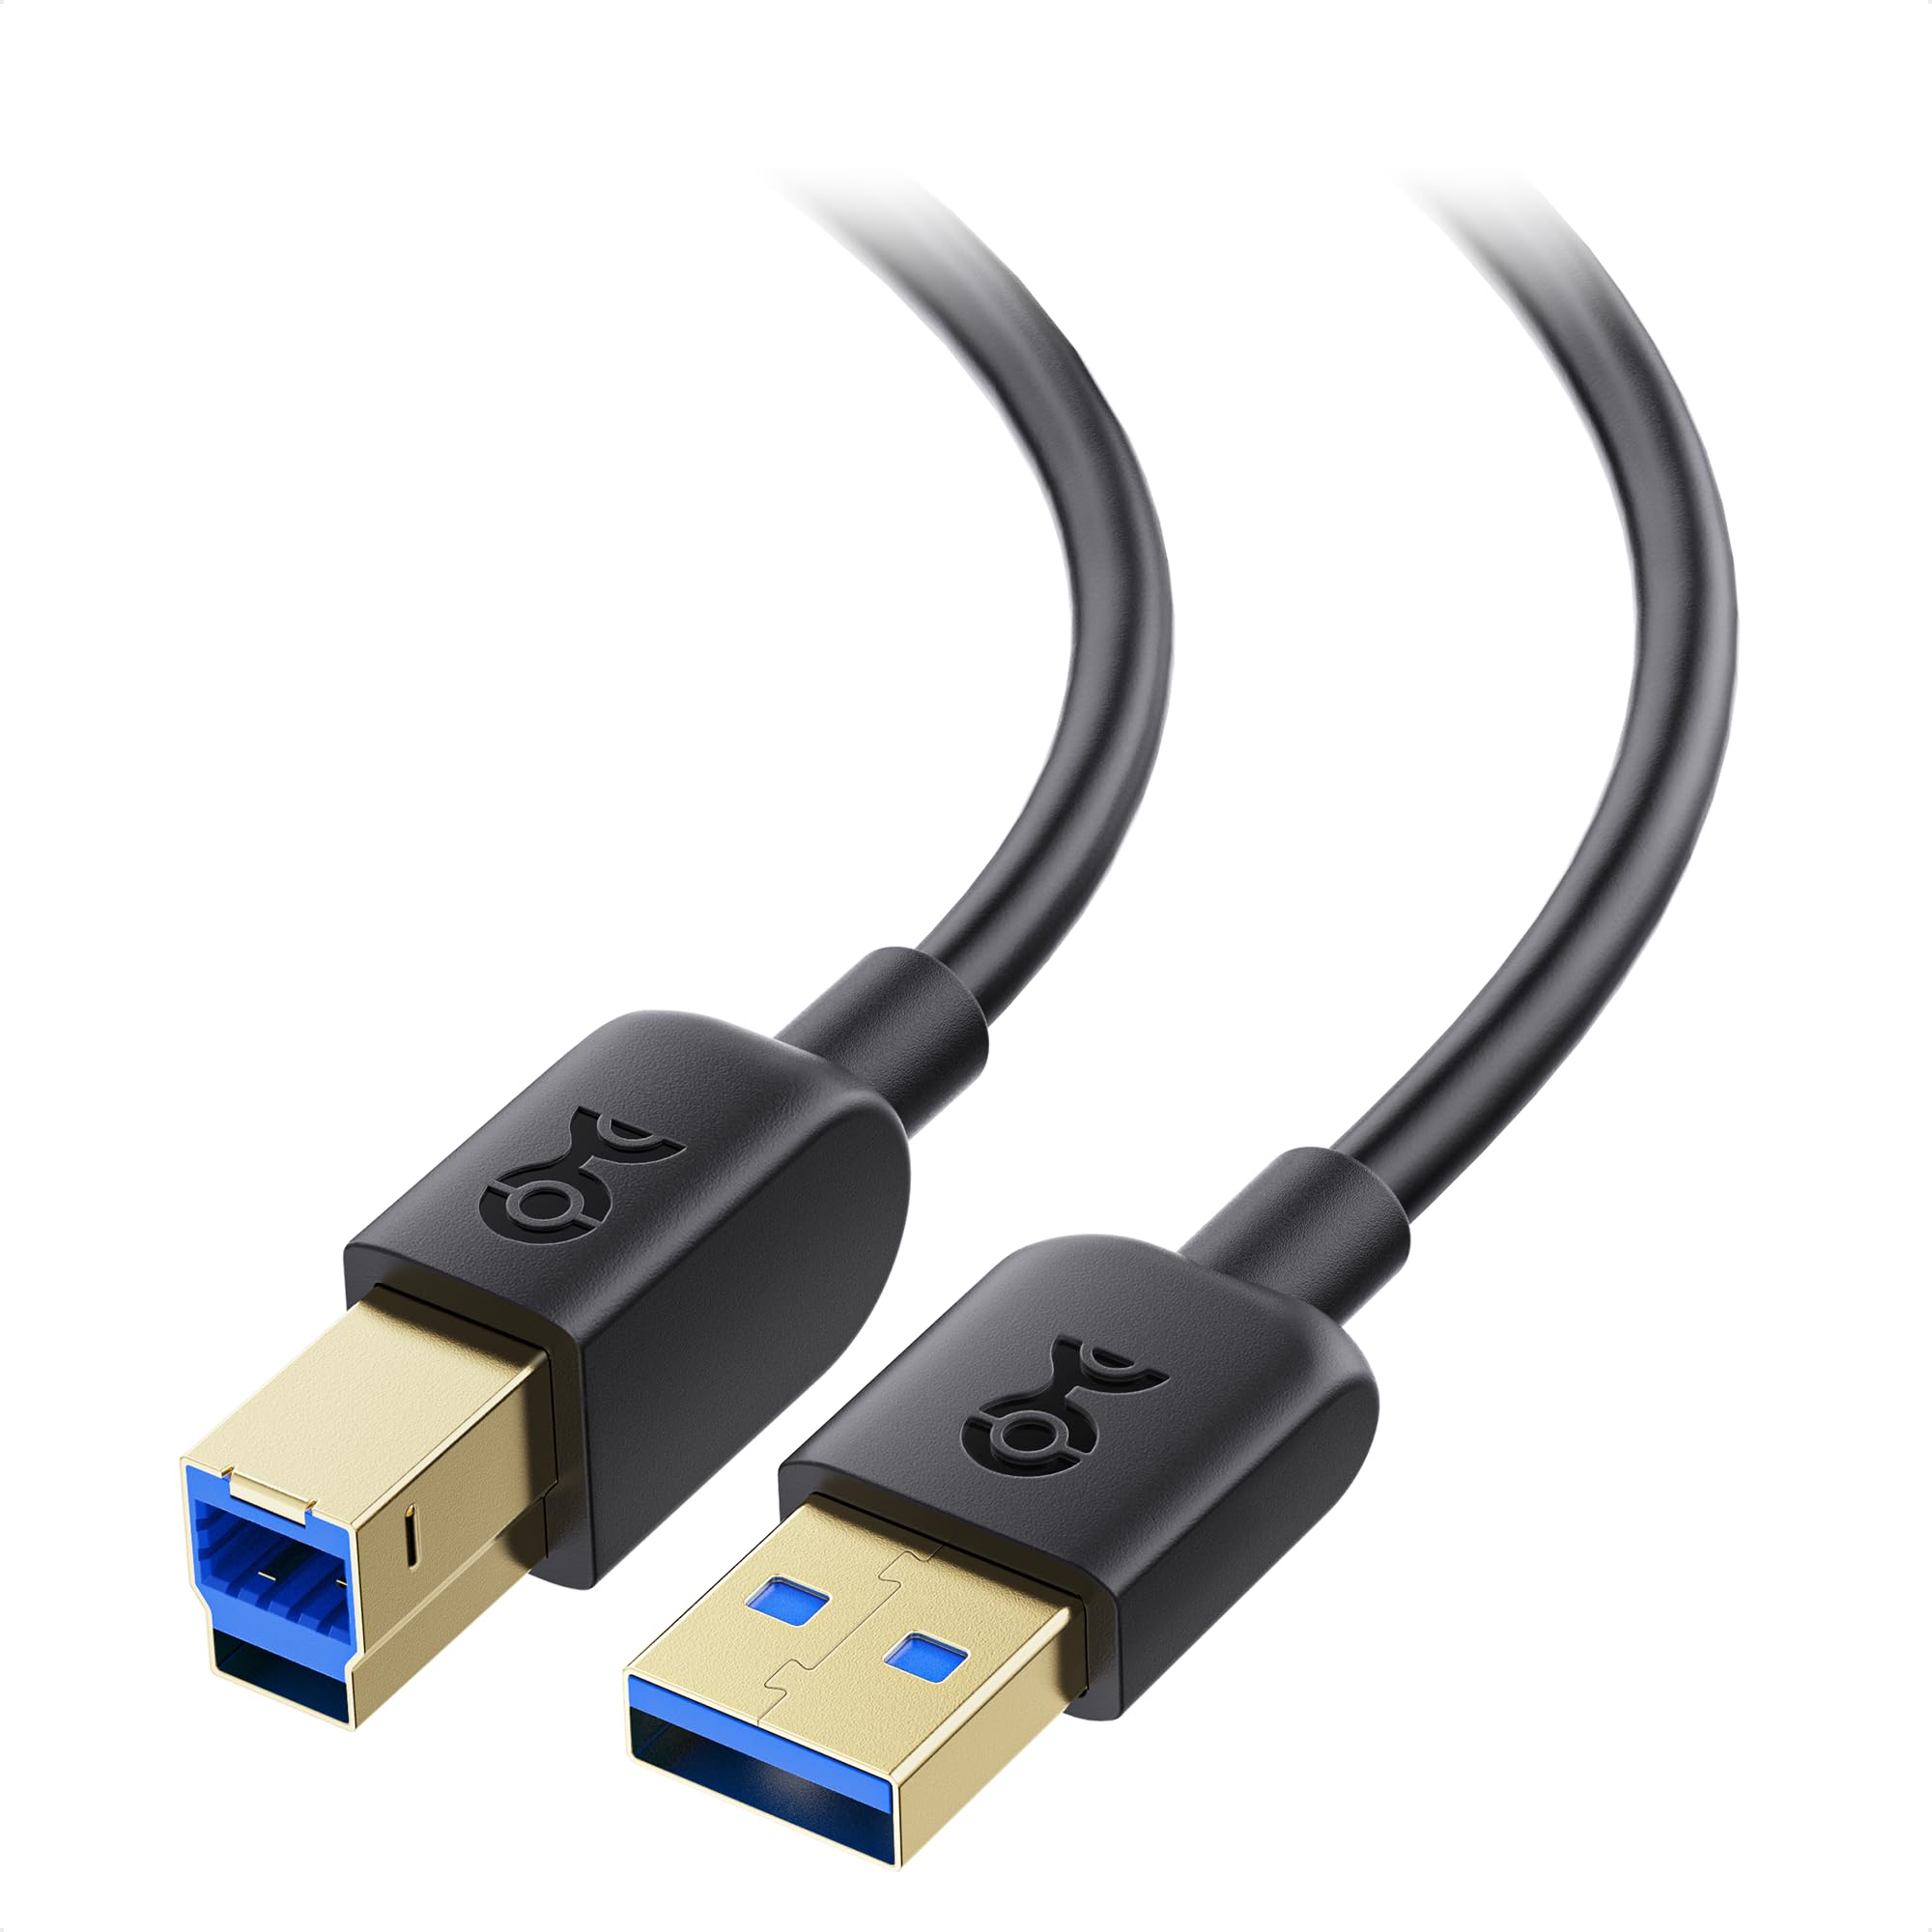 Book Cover Cable Matters Long USB 3.0 Cable (USB 3 Cable, USB 3.0 A to B Cable) in Black 15 ft 15 Feet Black 1